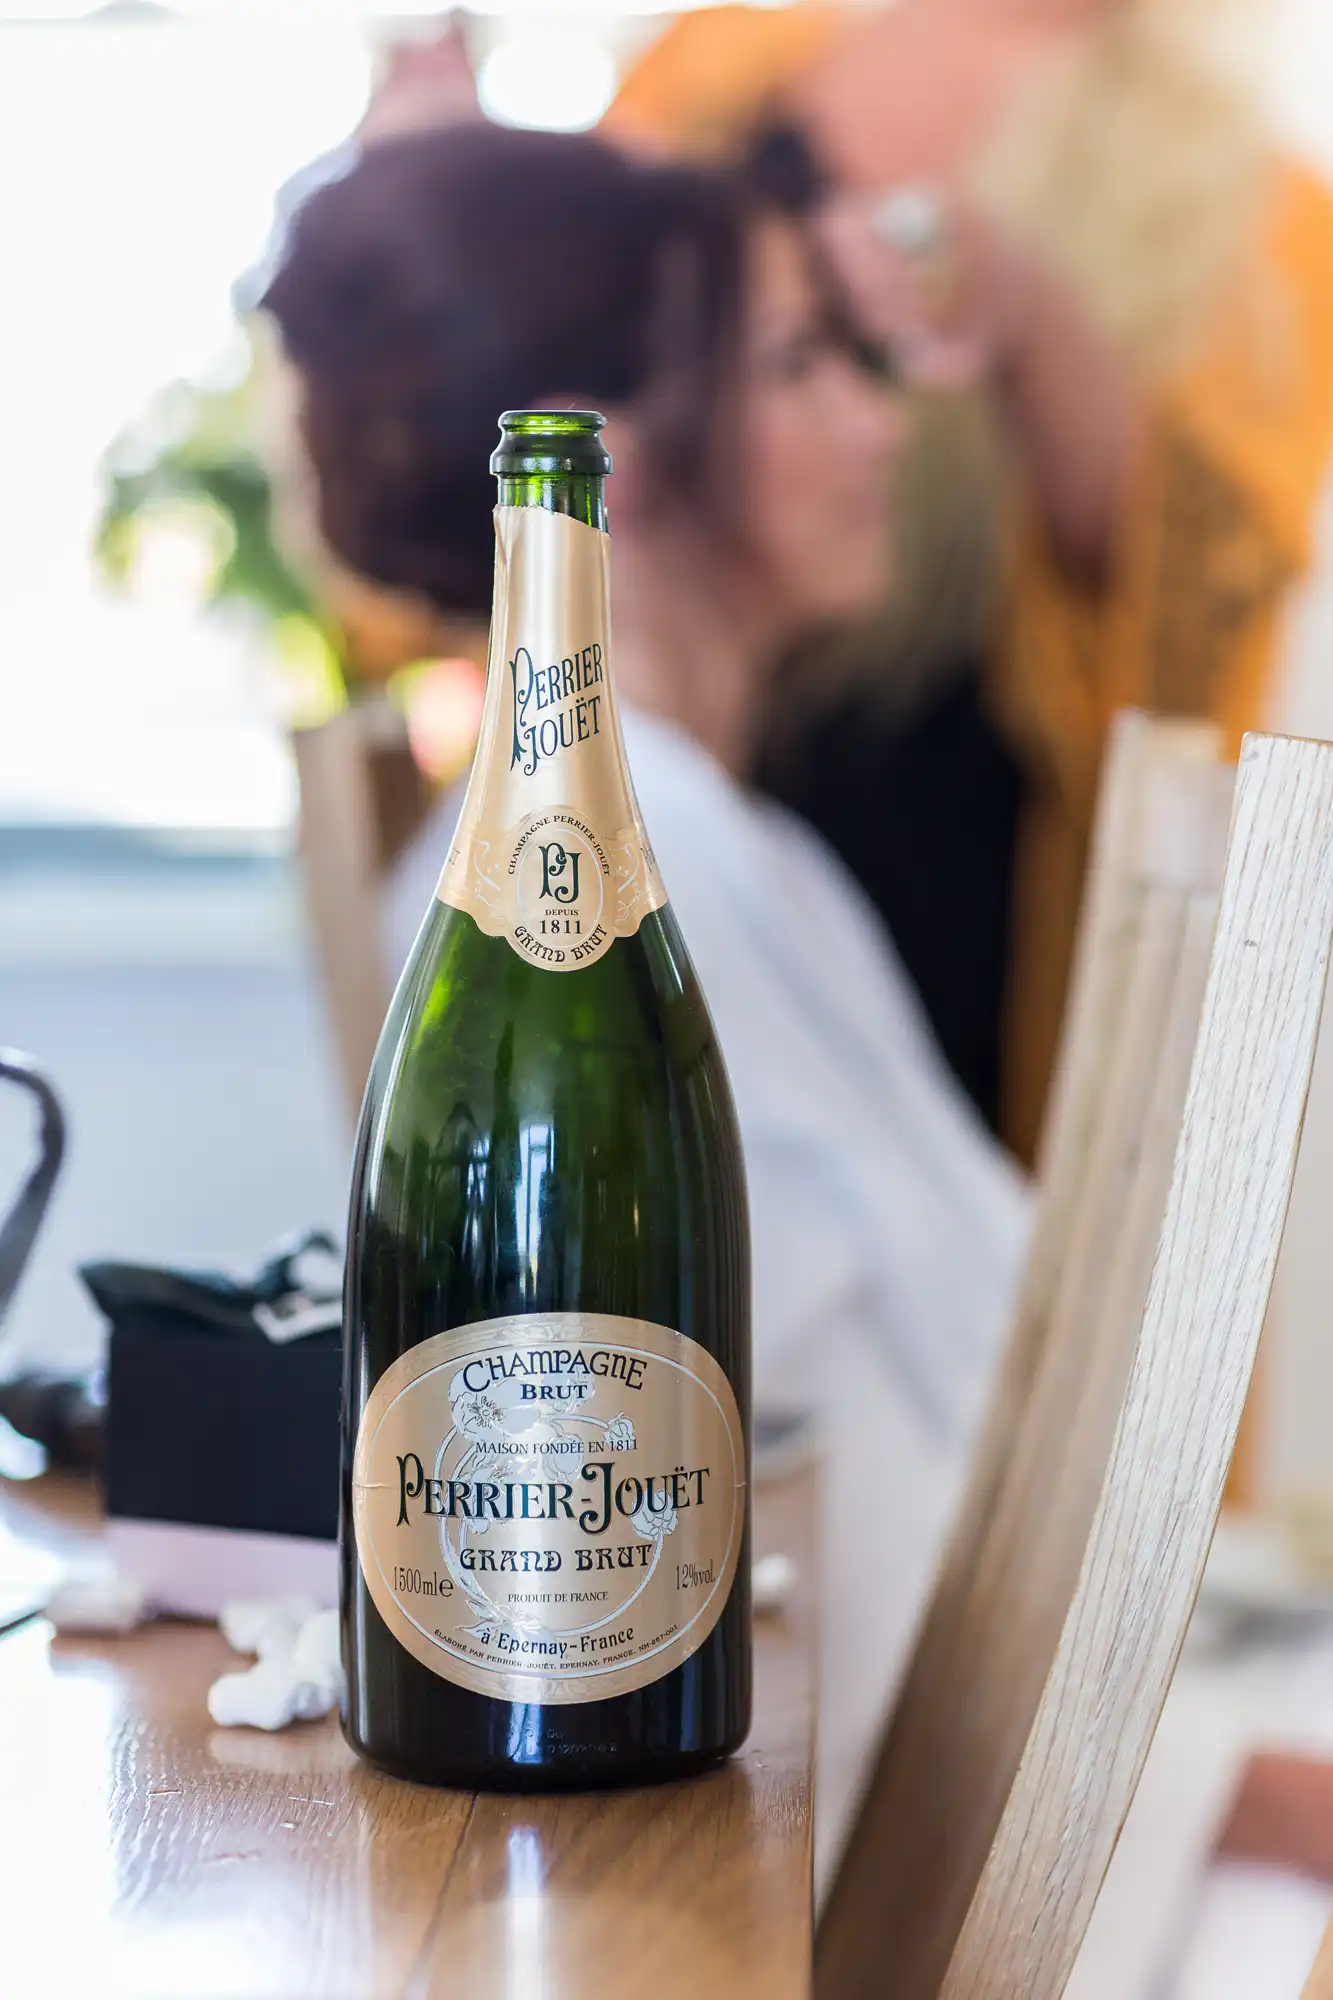 A close-up of a perrier-jouët champagne bottle on a table, with people softly blurred in the background.